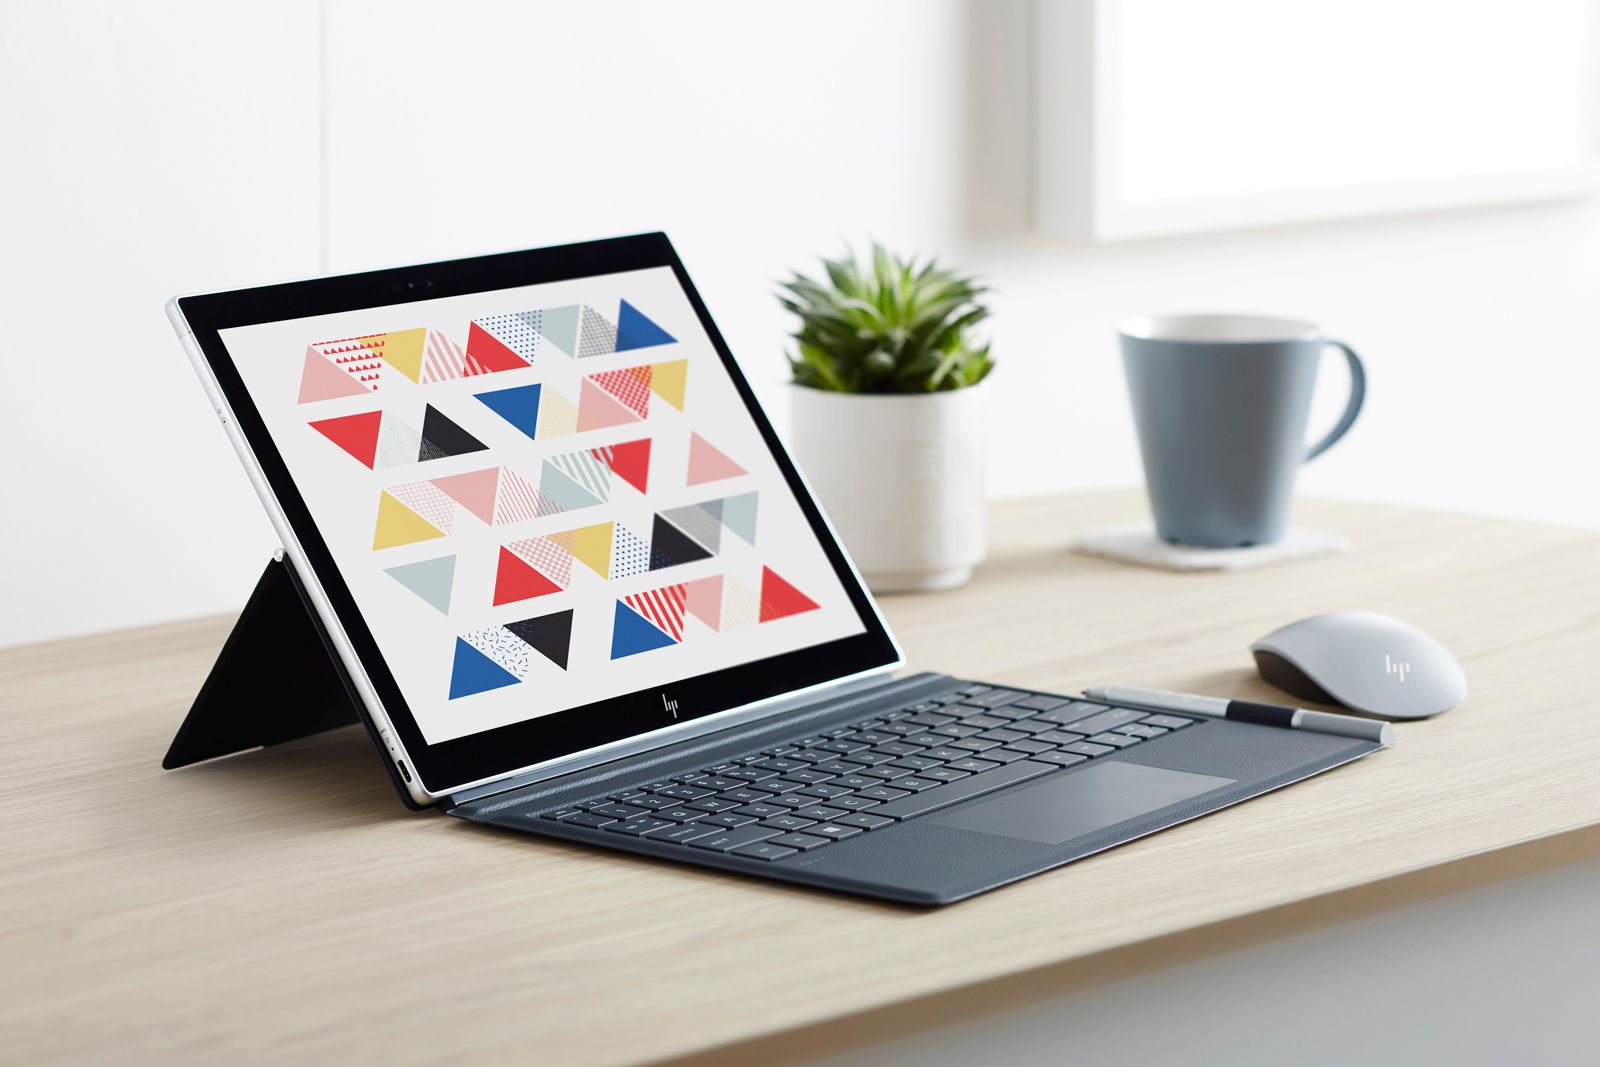 HP Envy x2 is an always-connected Snapdragon-powered Windows 10 2-in-1 image 1